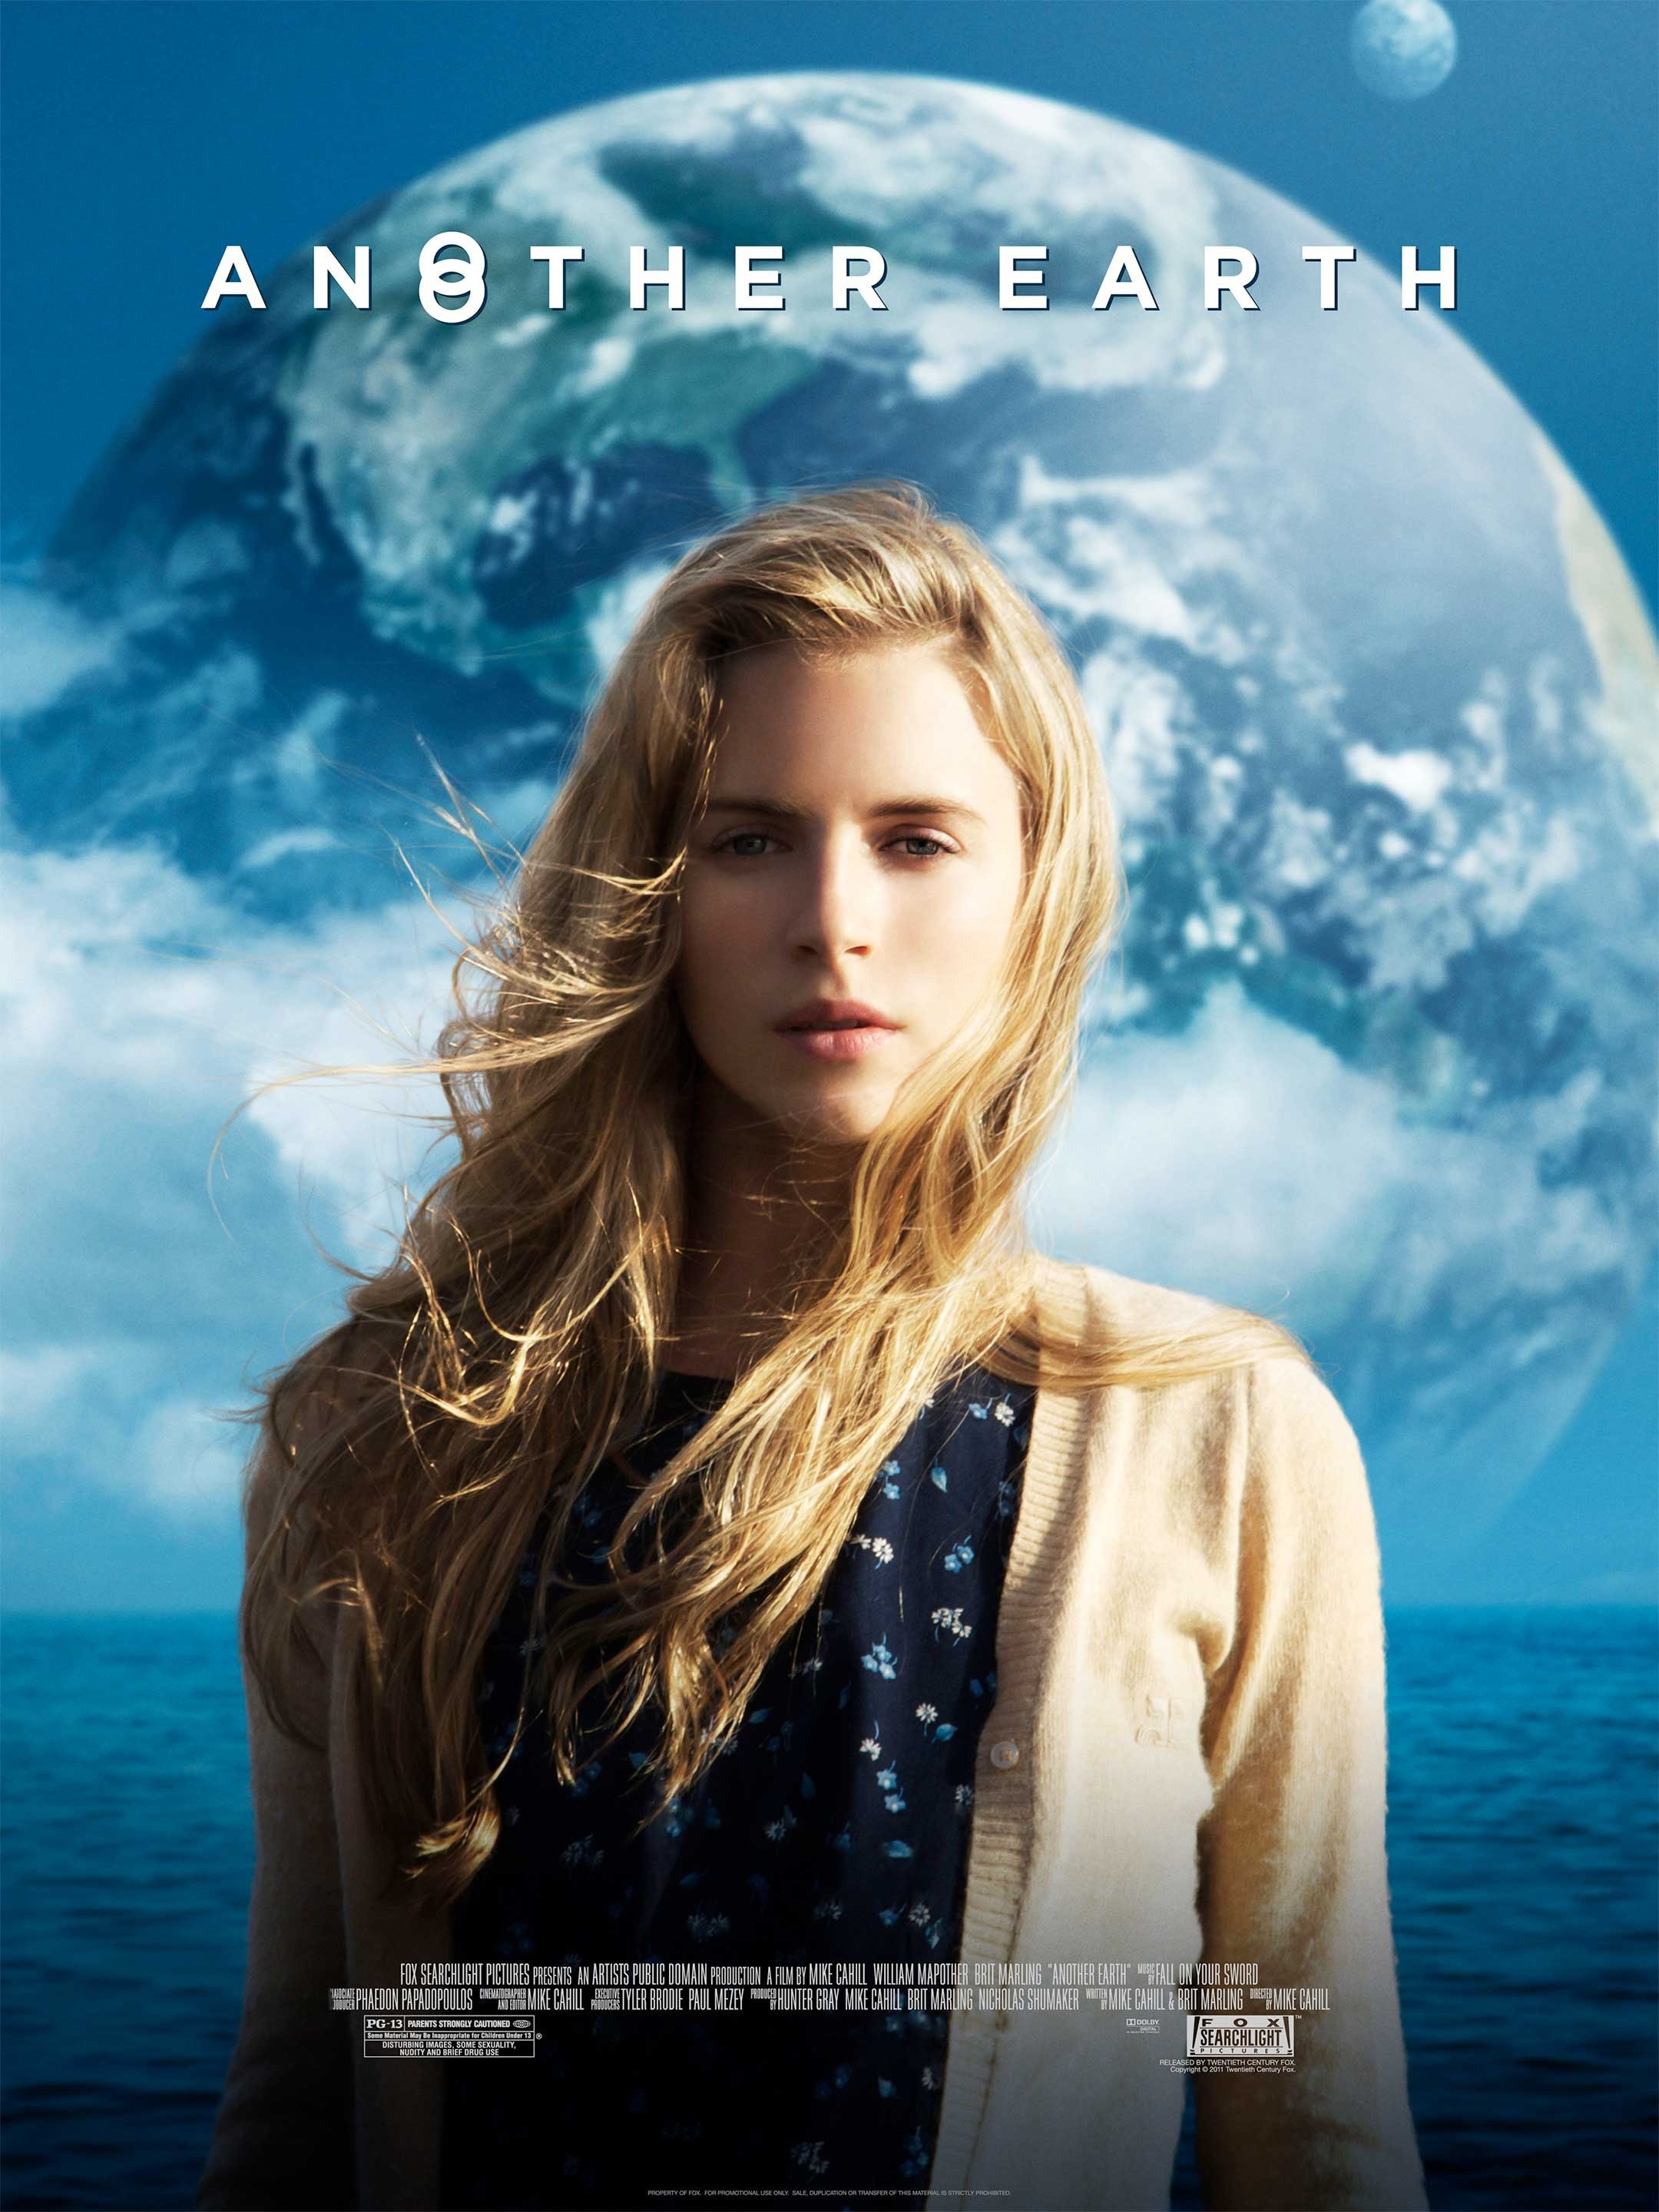 after earth movie free online 123